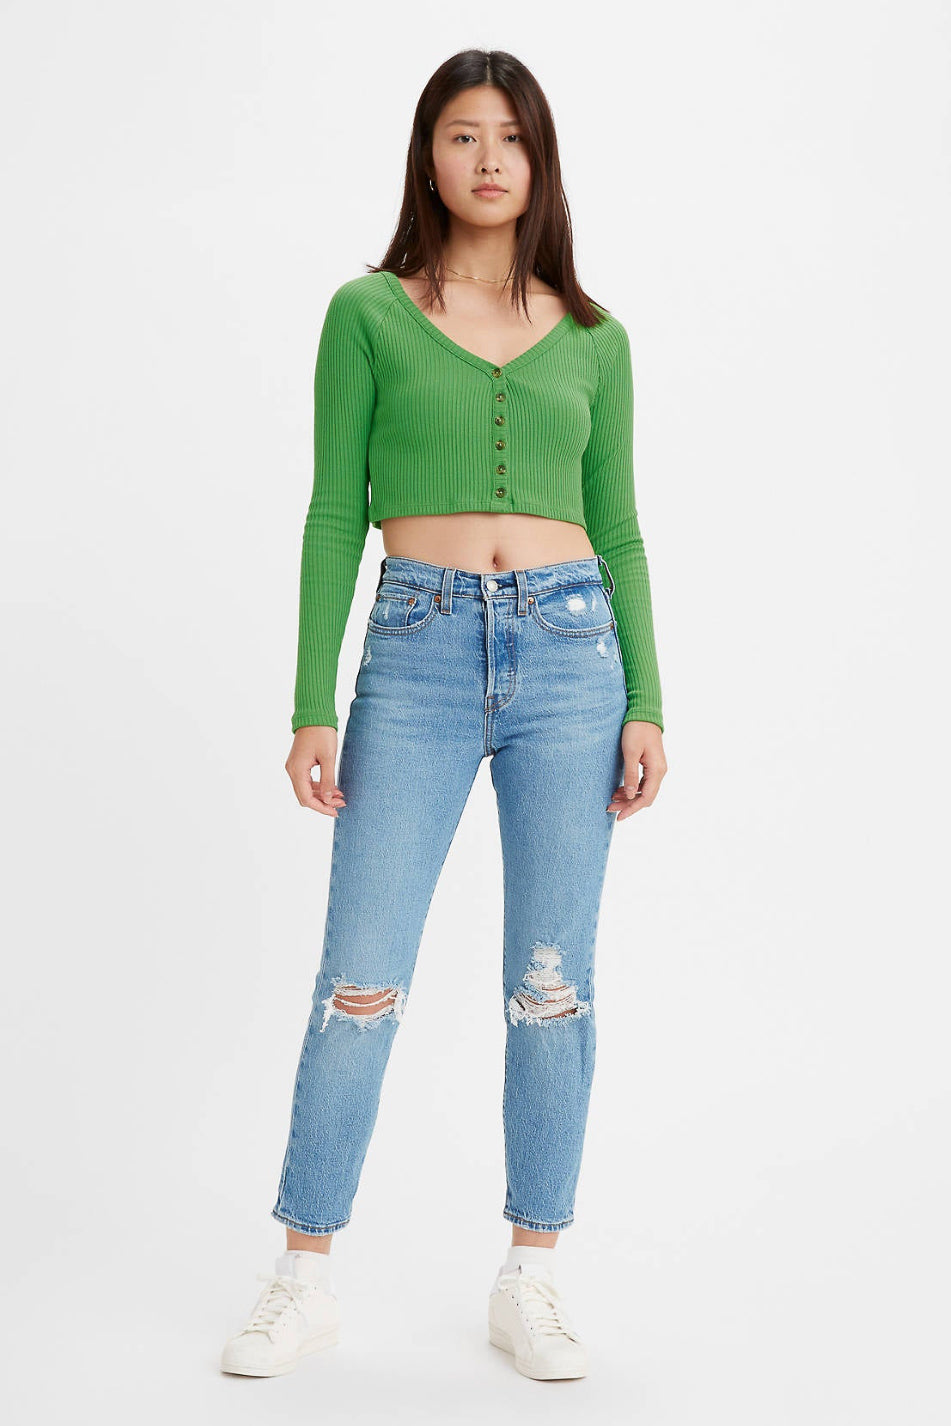 Levi's Wedgie Icon Fit - Jazz Devoted